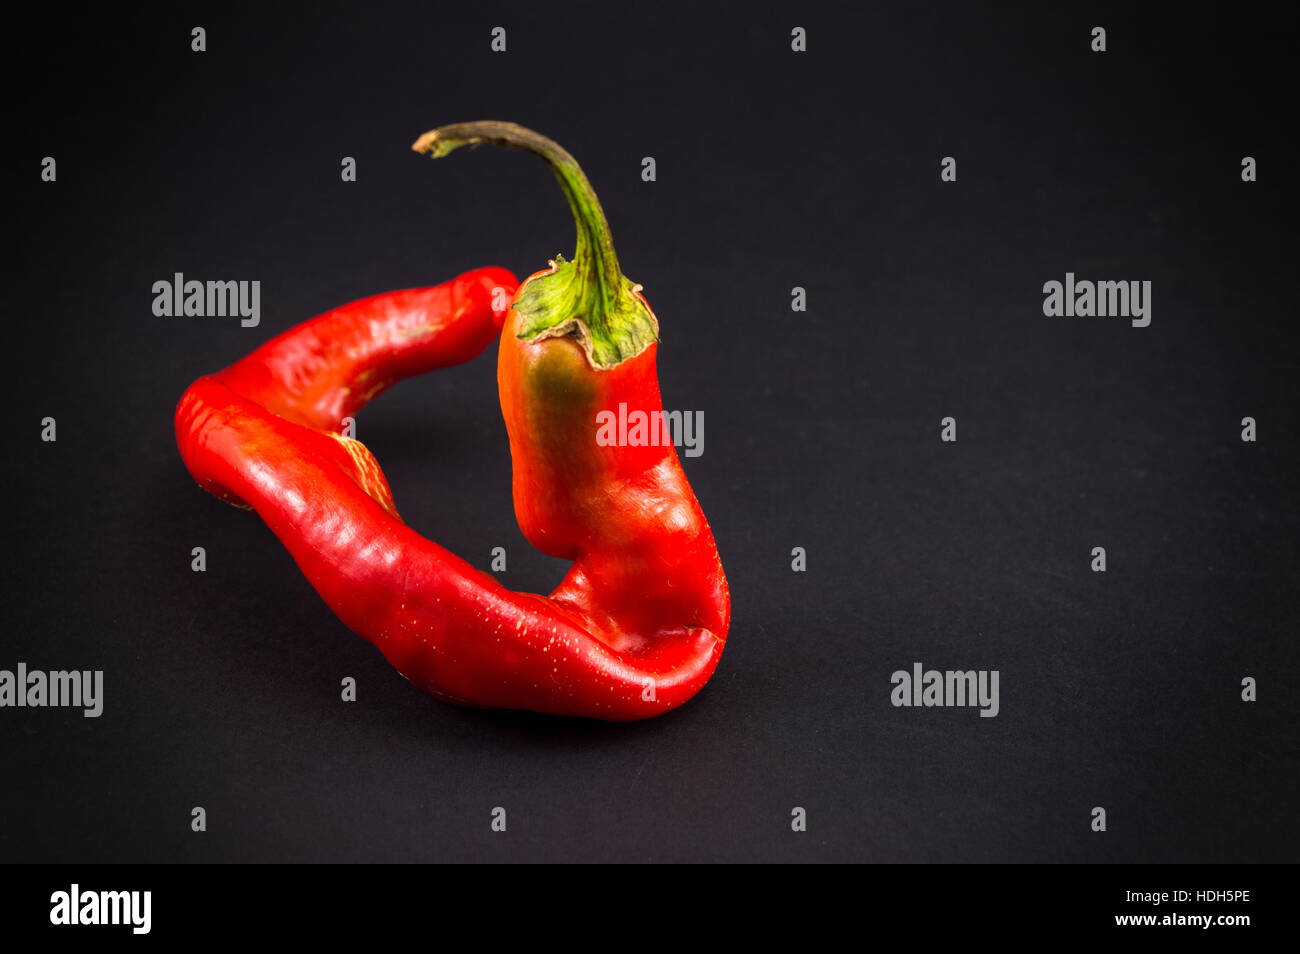 Red pepper on dark background with vignette Stock Photo